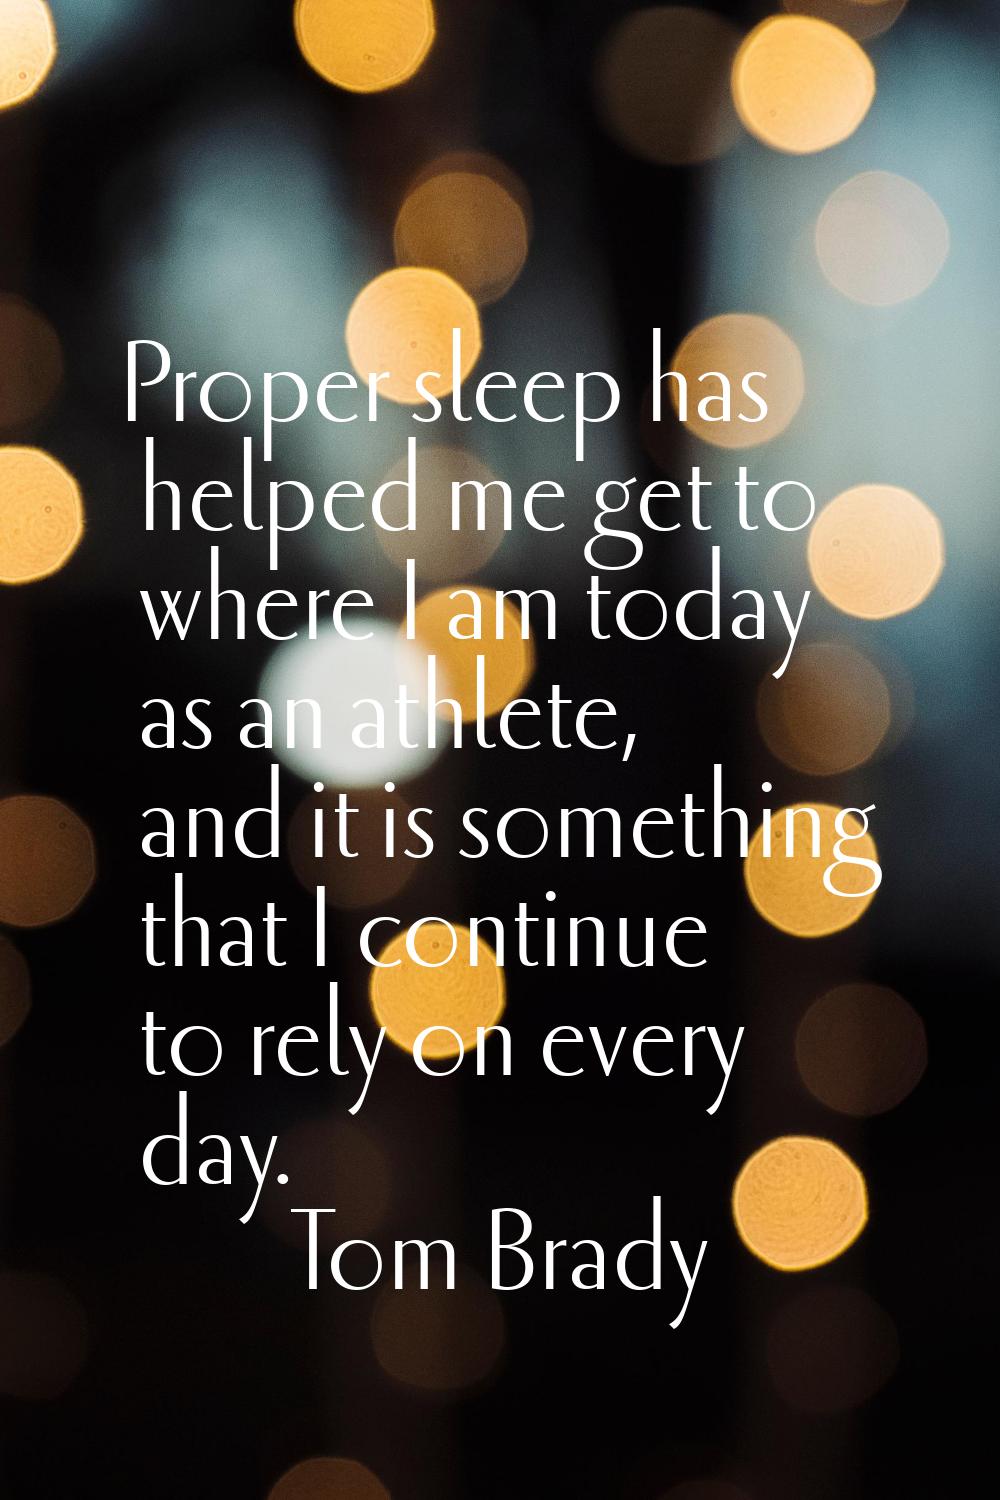 Proper sleep has helped me get to where I am today as an athlete, and it is something that I contin